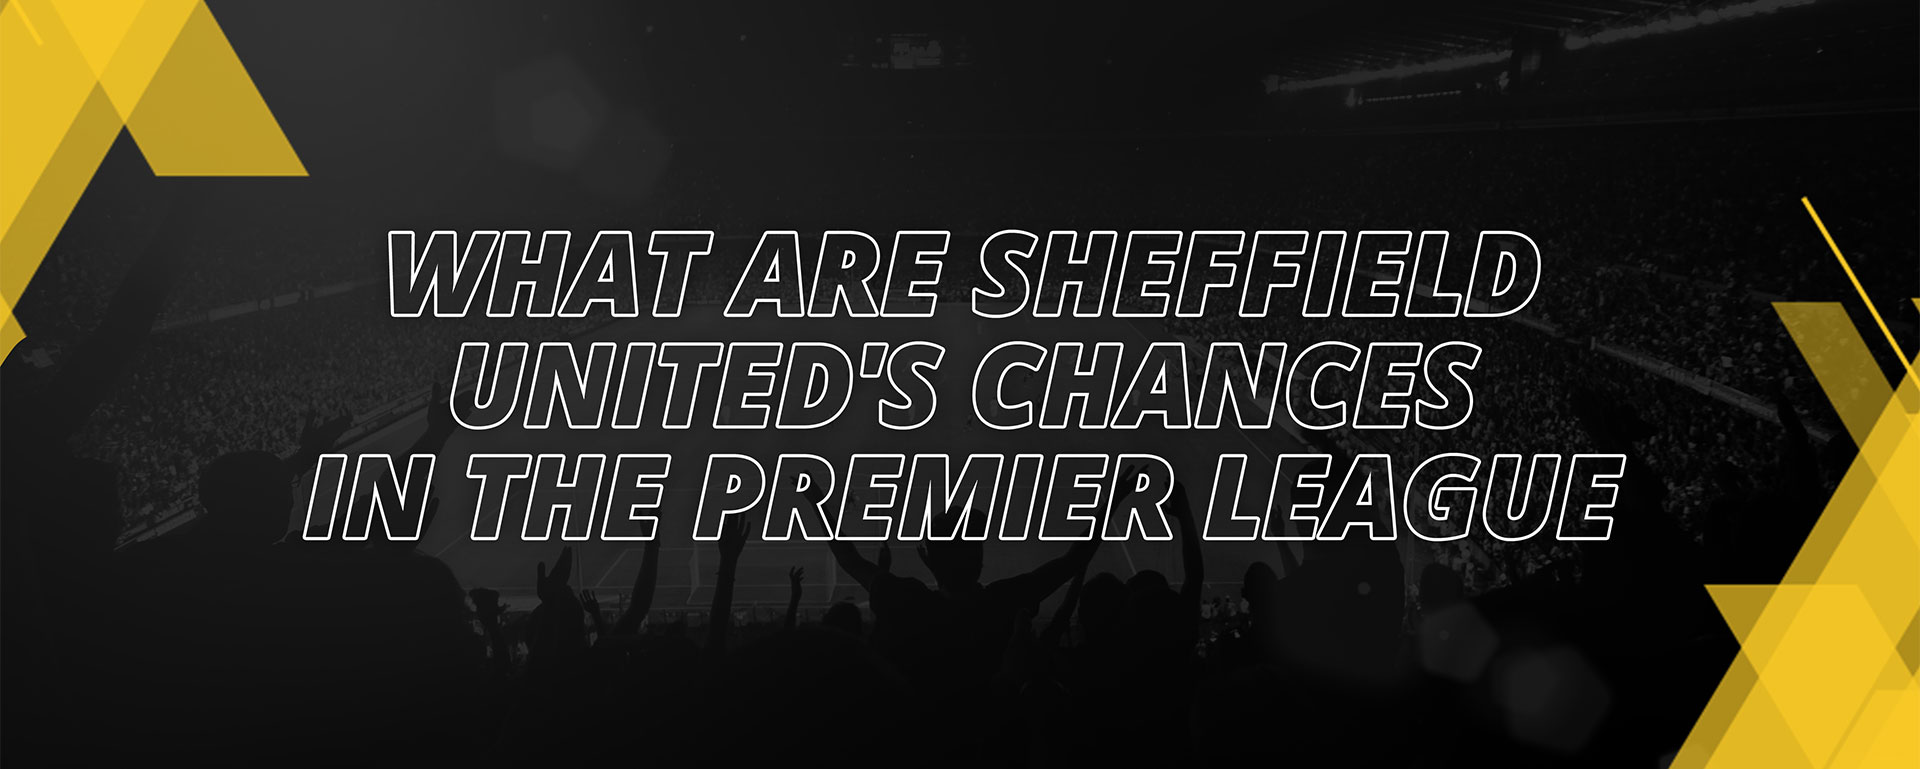 WHAT ARE SHEFFIELD UNITED’S CHANCES IN THE PREMIER LEAGUE